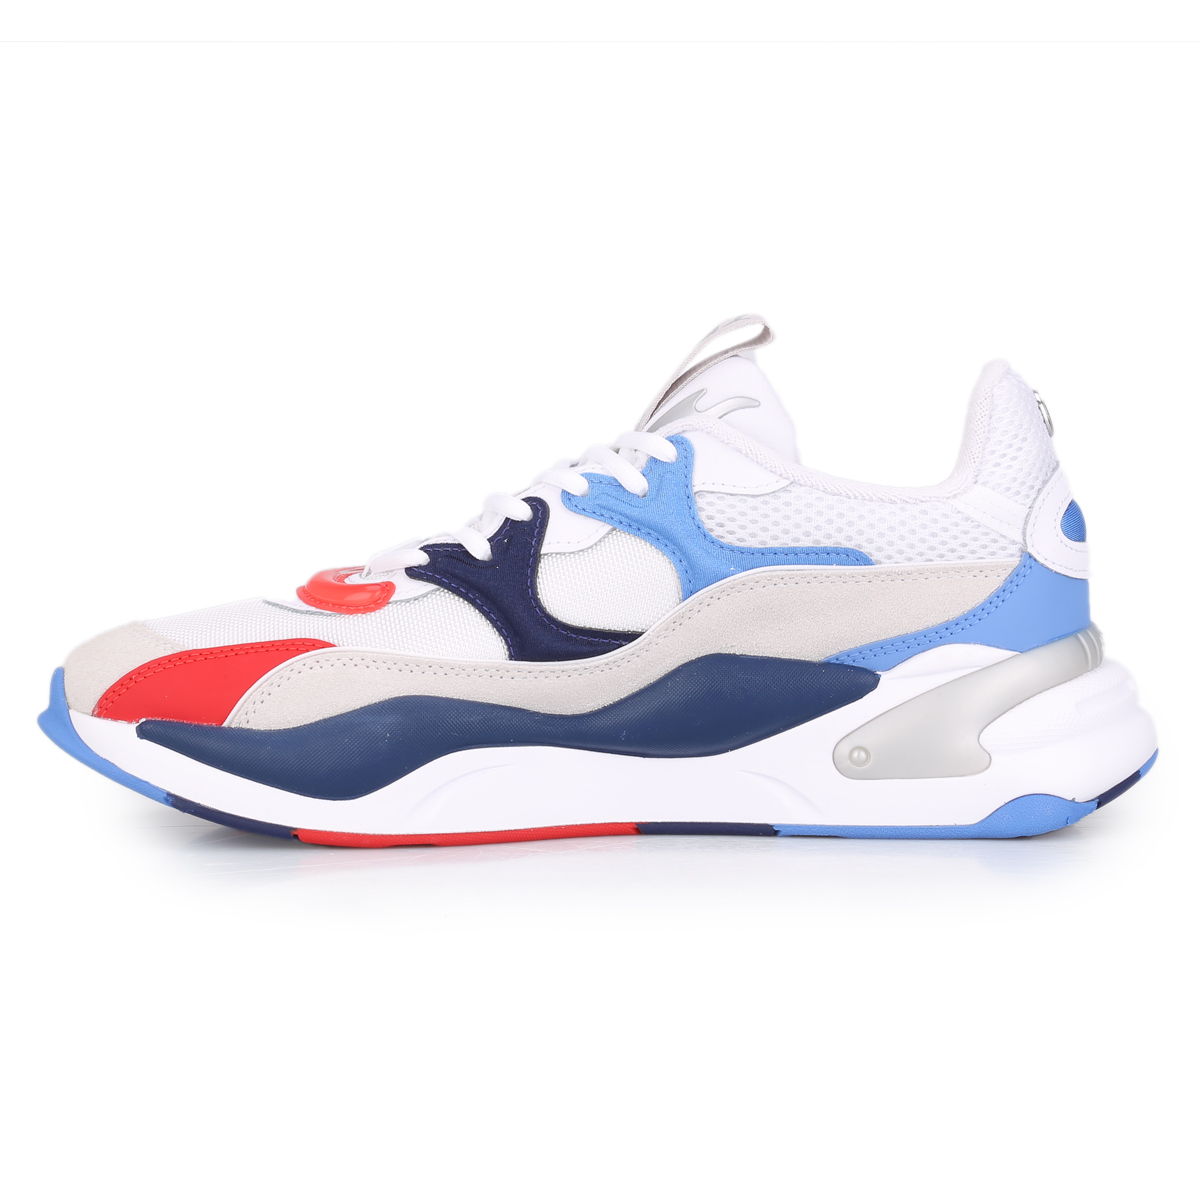 Zapatillas Puma Bmw Mms Rs-2k,  image number null